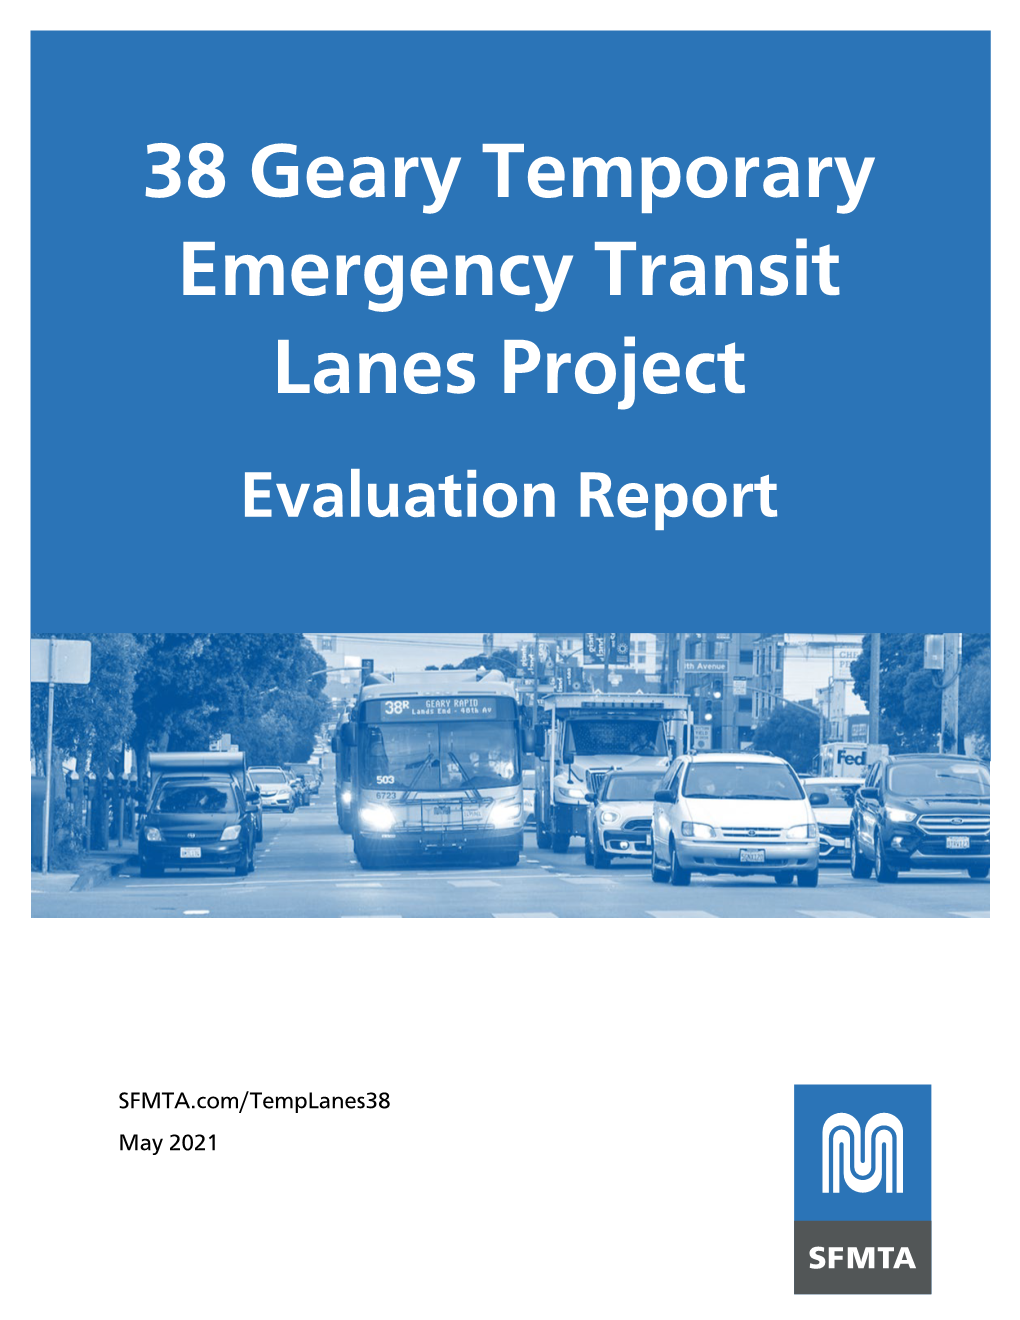 38 Geary Temporary Emergency Transit Lanes: Evaluation Report